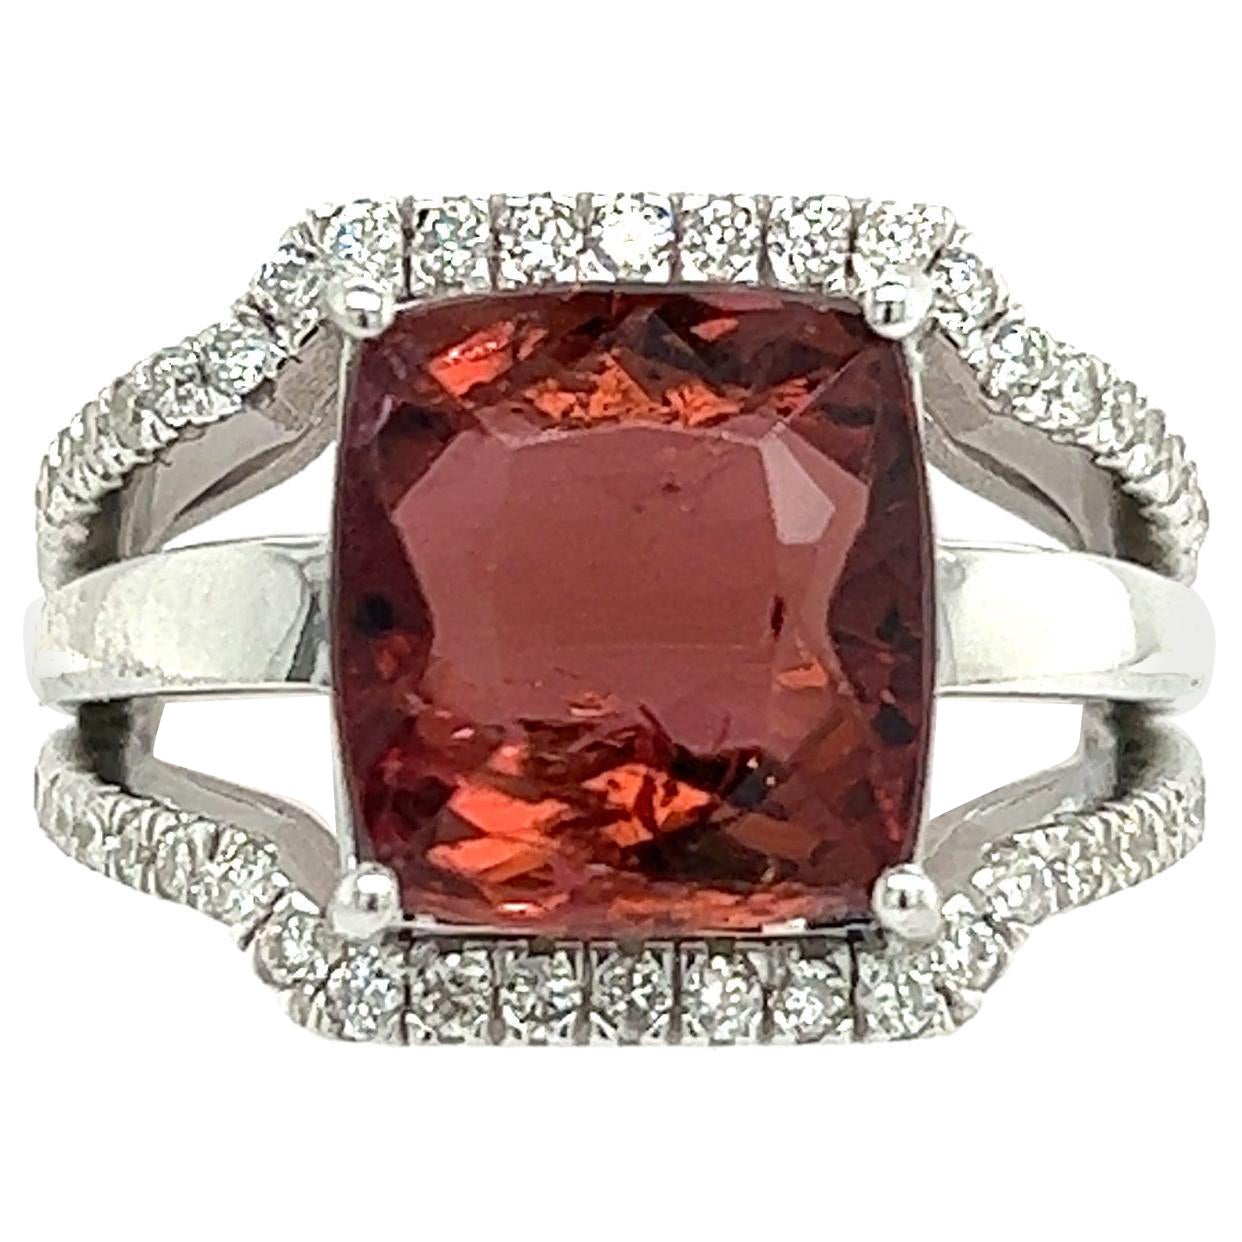 Natural Tourmaline Diamond Ring 6.5 14k White Gold 5.89 TCW Certified For Sale